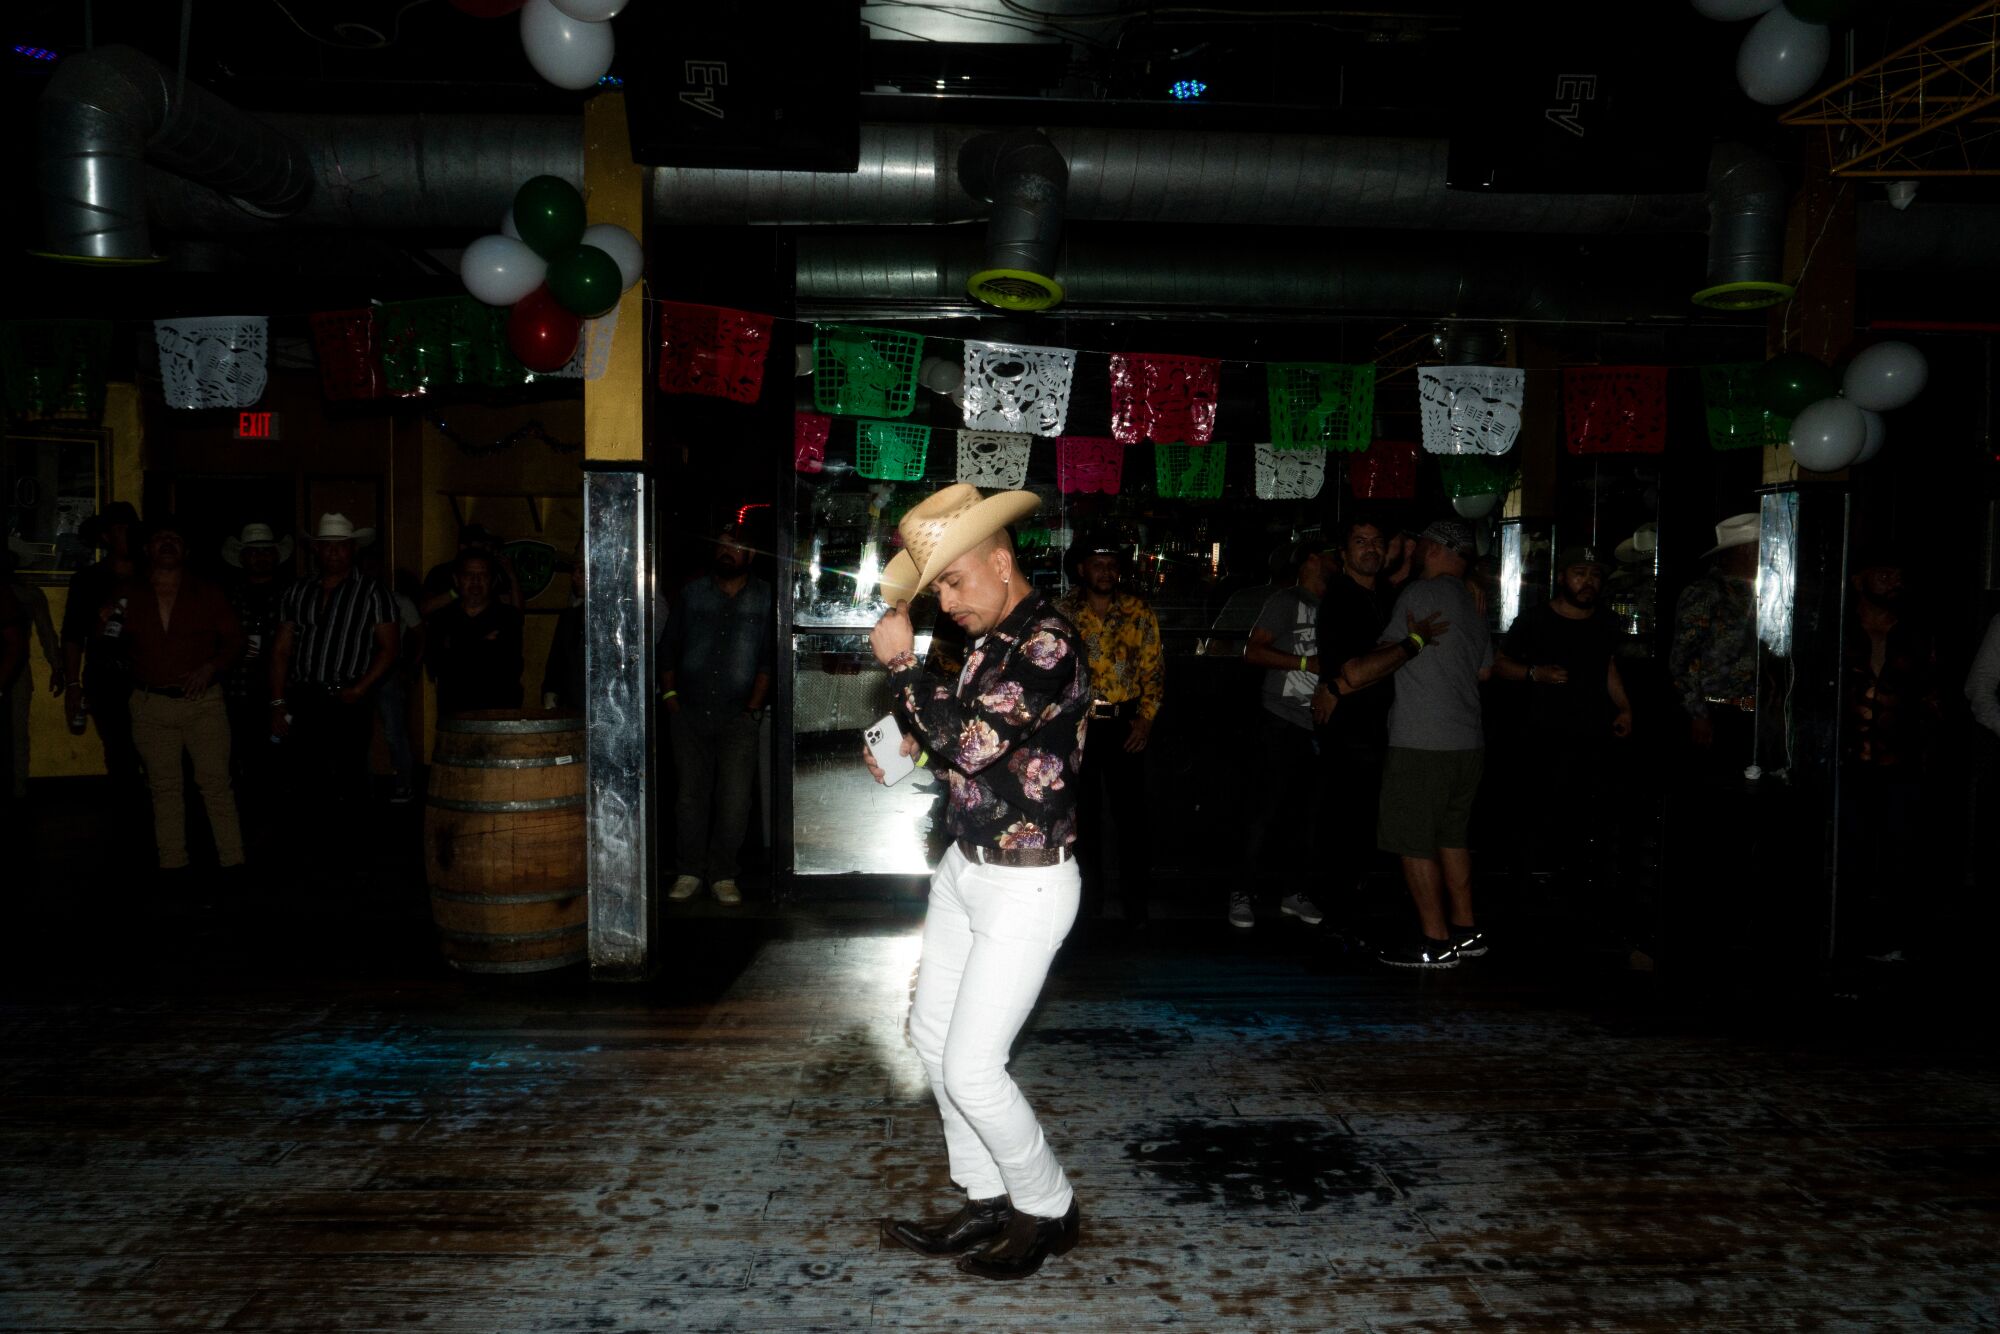 A man in white pants, a floral shirt and a cowboy hat dances alone on a club dance floor.